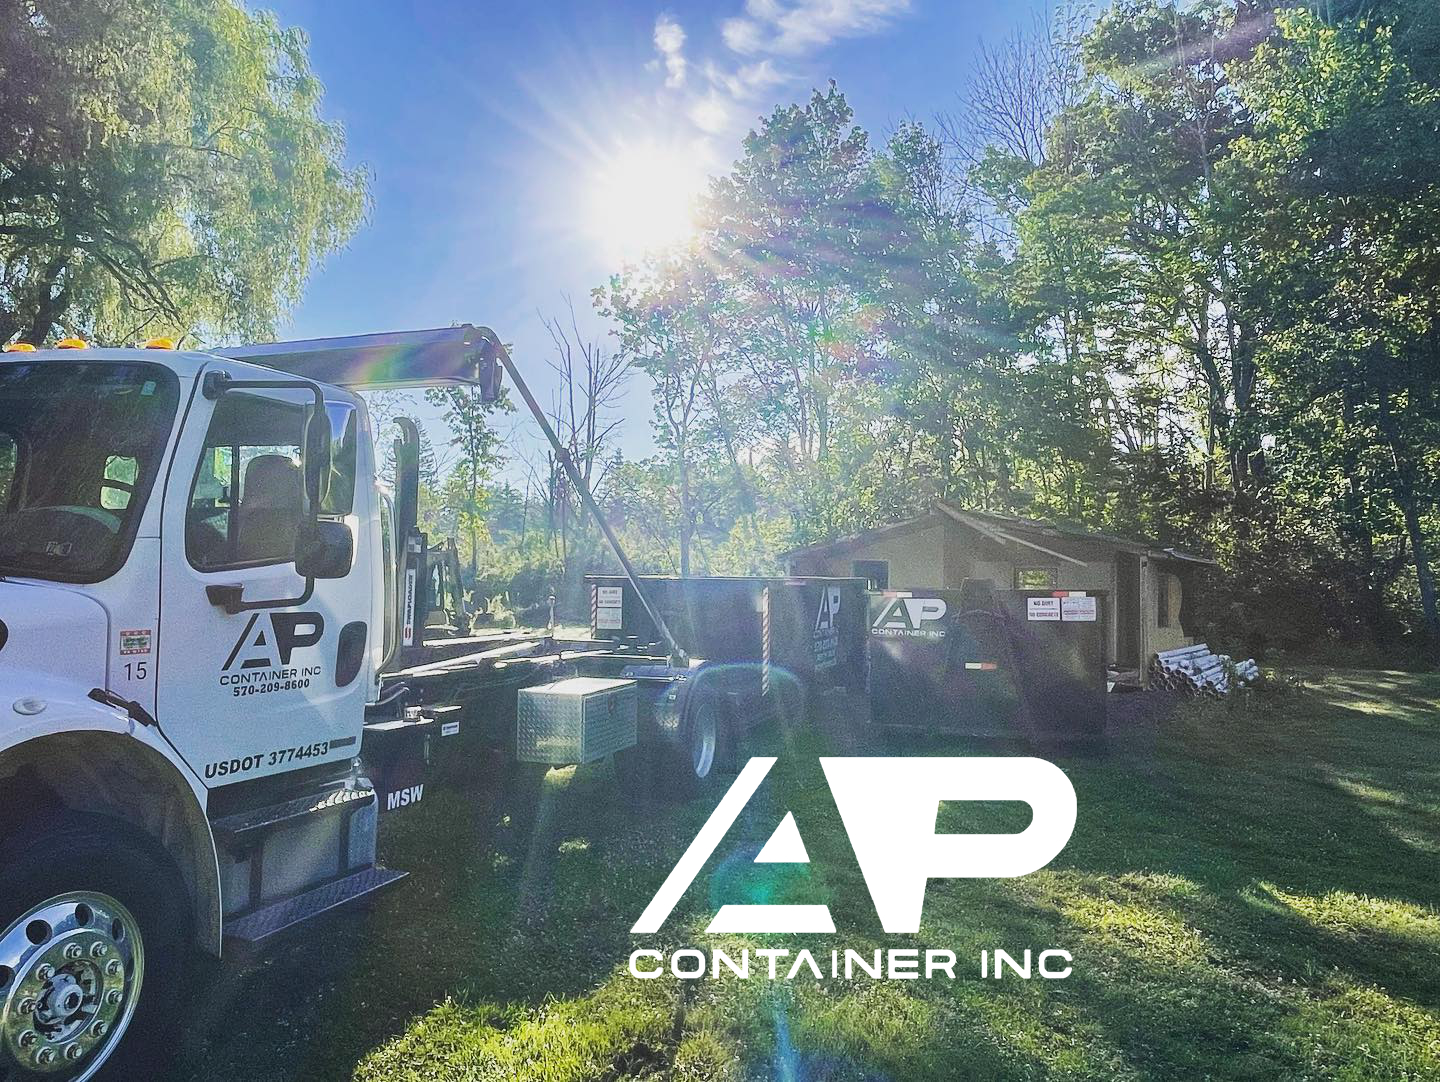 Commercial Dumpster Rental AP Container Taylor PA